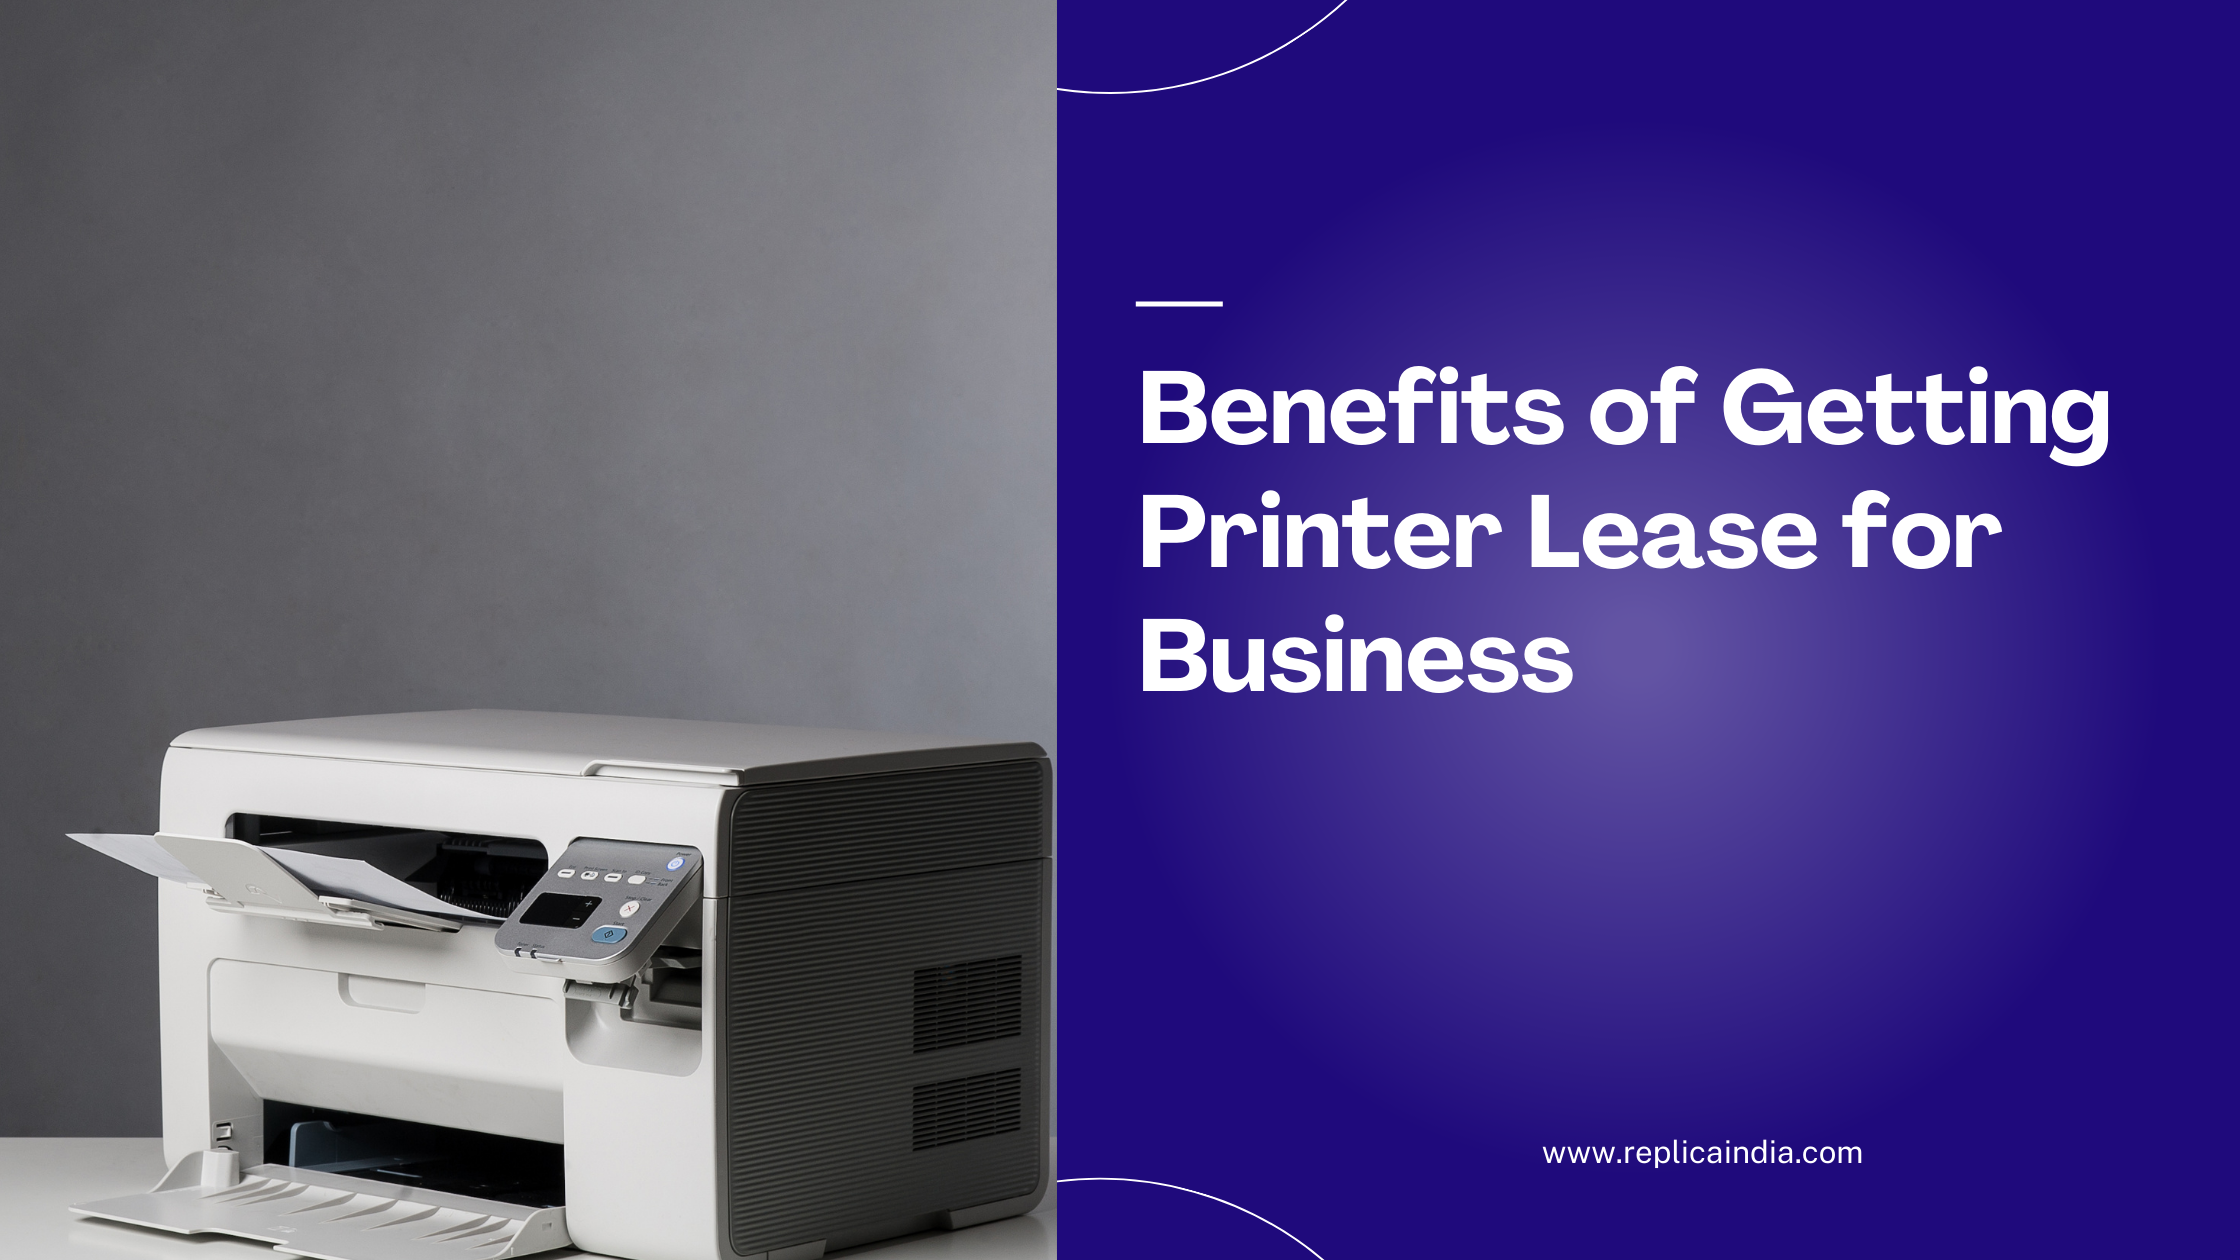 7 Benefits of Getting a Printer Lease for Your Business